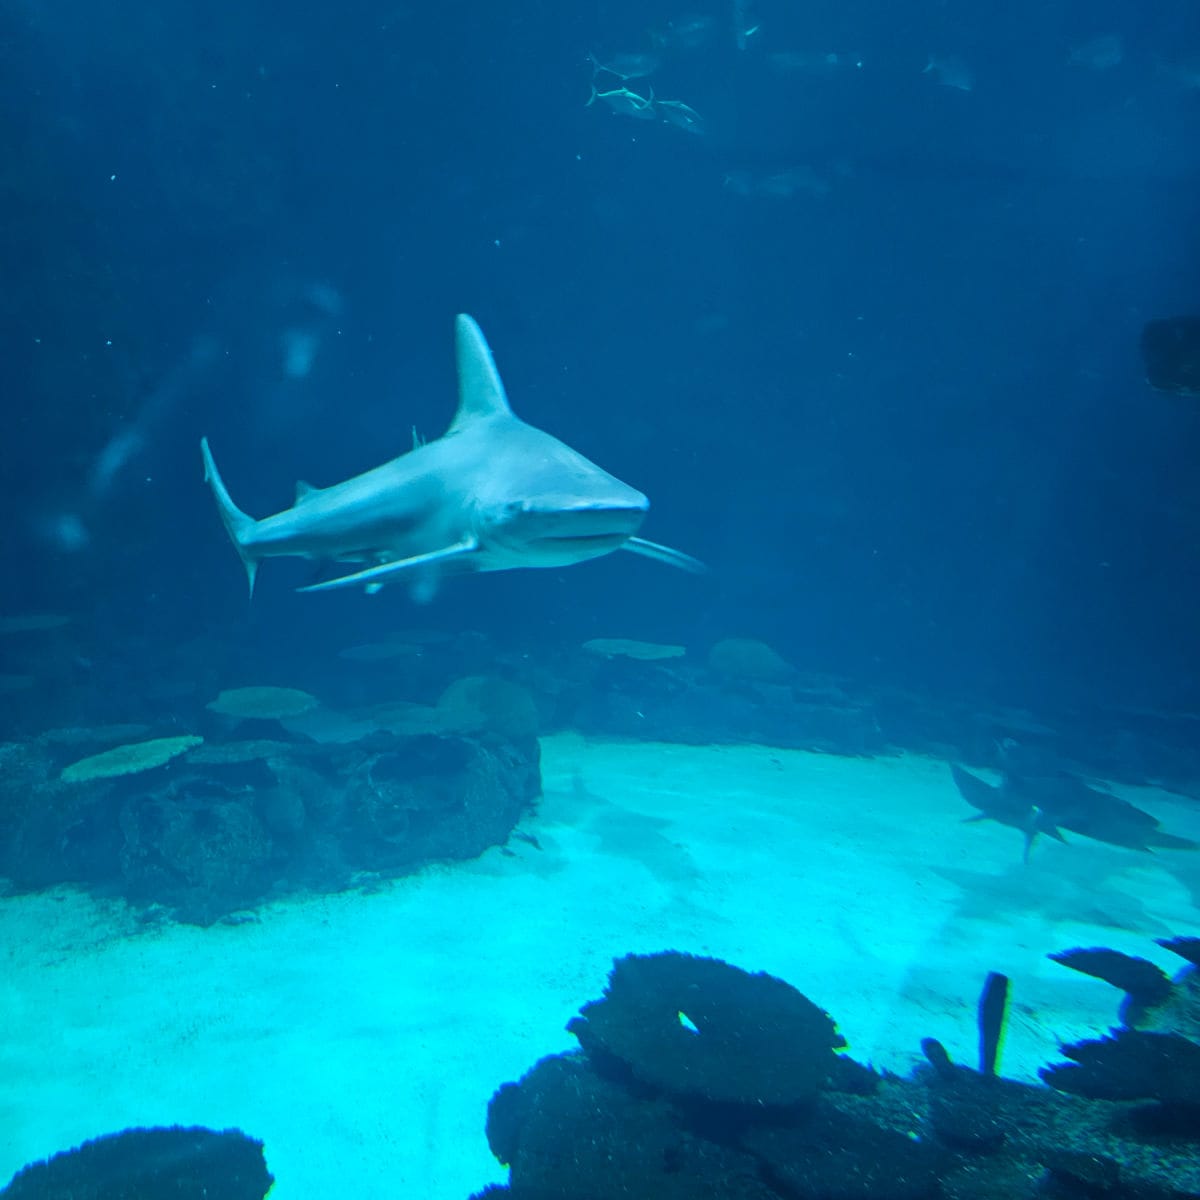 Shark in an aquarium with other fish and coral